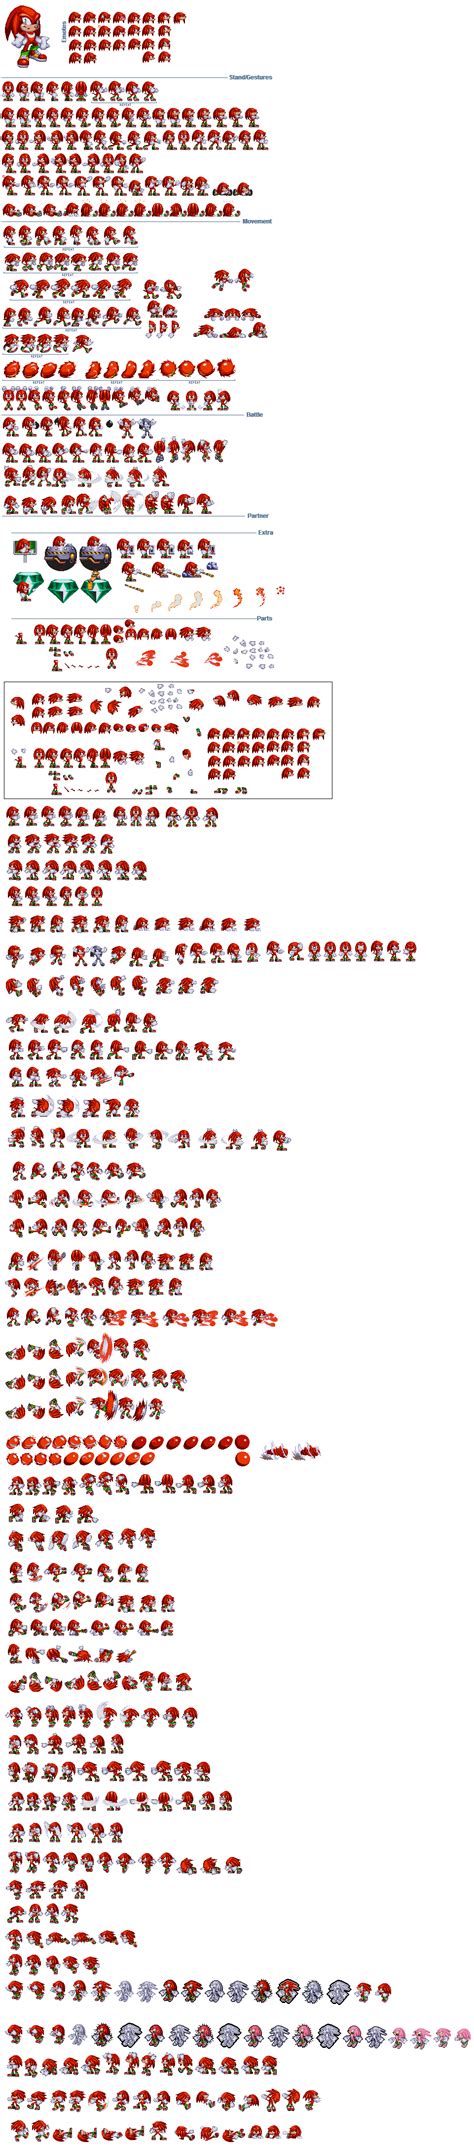 Knuckles Th Sprites Sheet By Satouncristian On Deviantart